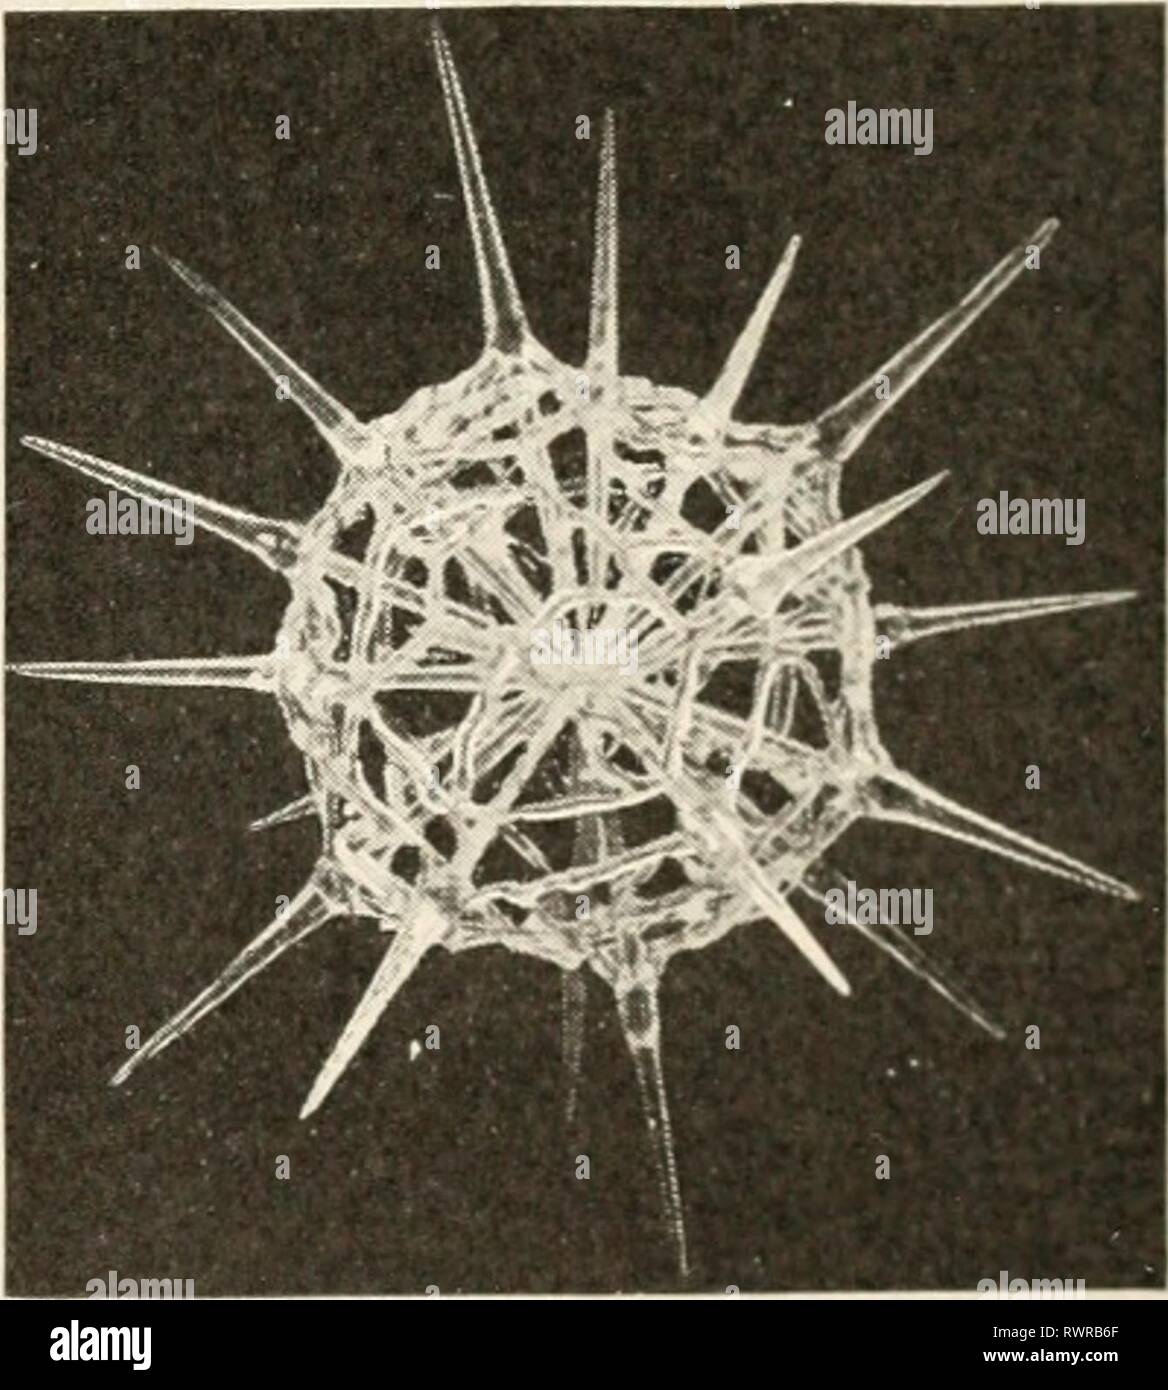 Elements of biology; a practical Elements of biology; a practical text-book correlating botany, zoology, and human physiology elementsofbiolog00hunt Year: [c1907]  PROTOZOA 183 The amoeba, like other one-celled organisms, reproduces by the process of fission. A single cell divides by splitting into two others, each of which resembles the parent cell except that they are of less bulk. When these become the size of the parent amoeba, they in turn each divide. This is a kind of asexual repro- duction. When conditions unfavorable for life come, the amoeba, like some one-celled plants, encysts itse Stock Photo